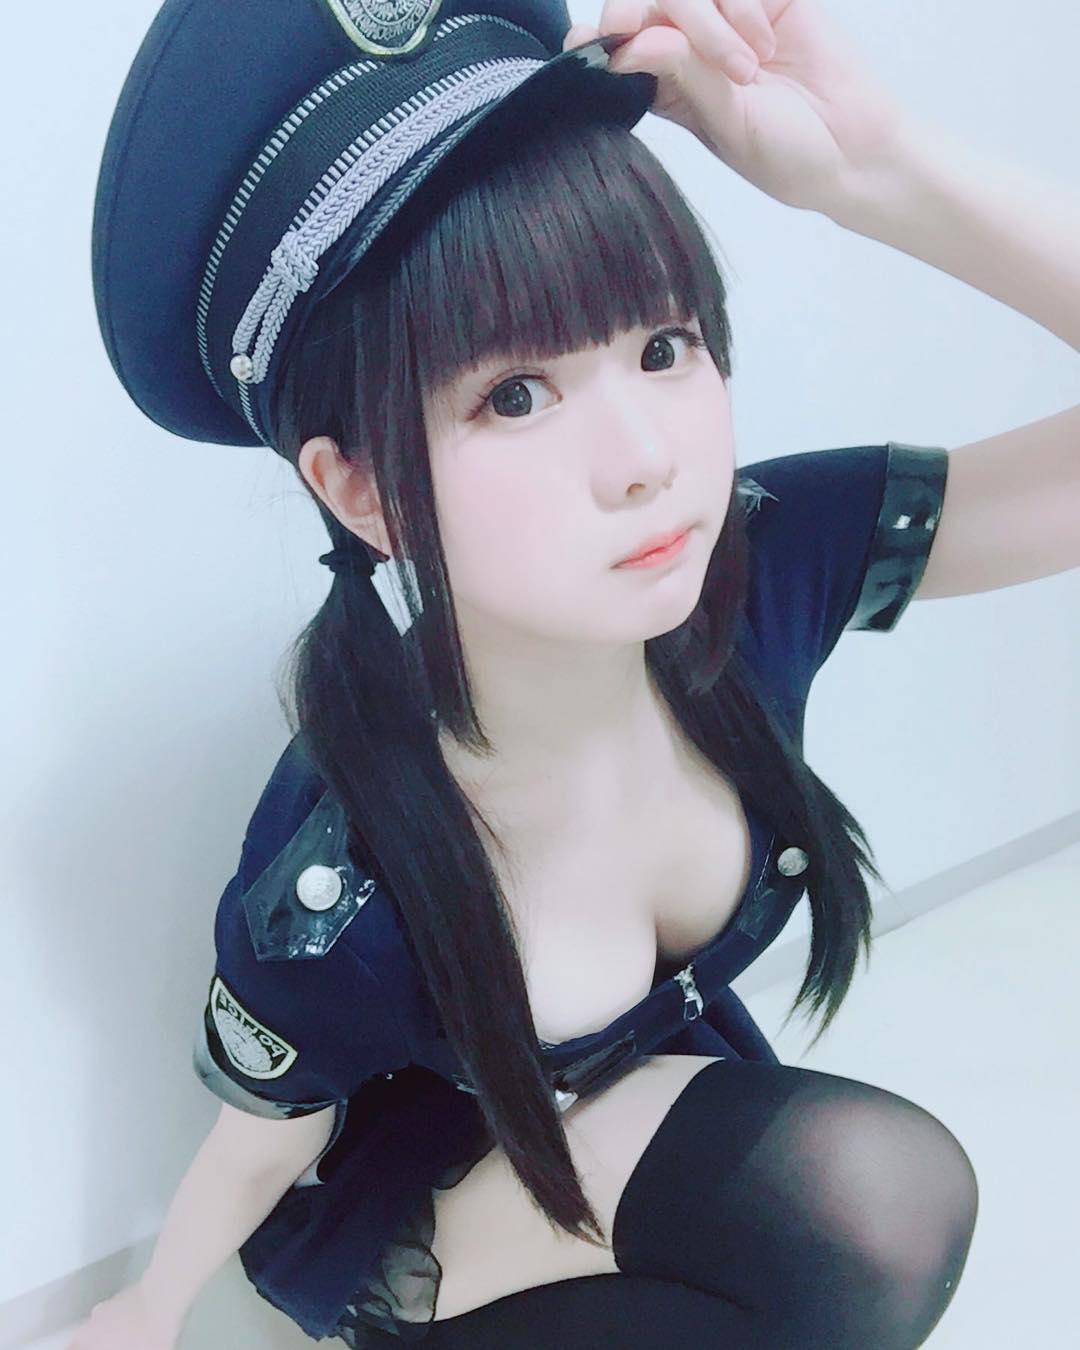 Shimo Tsuki is a Cute Police Girl with Perfect Breasts